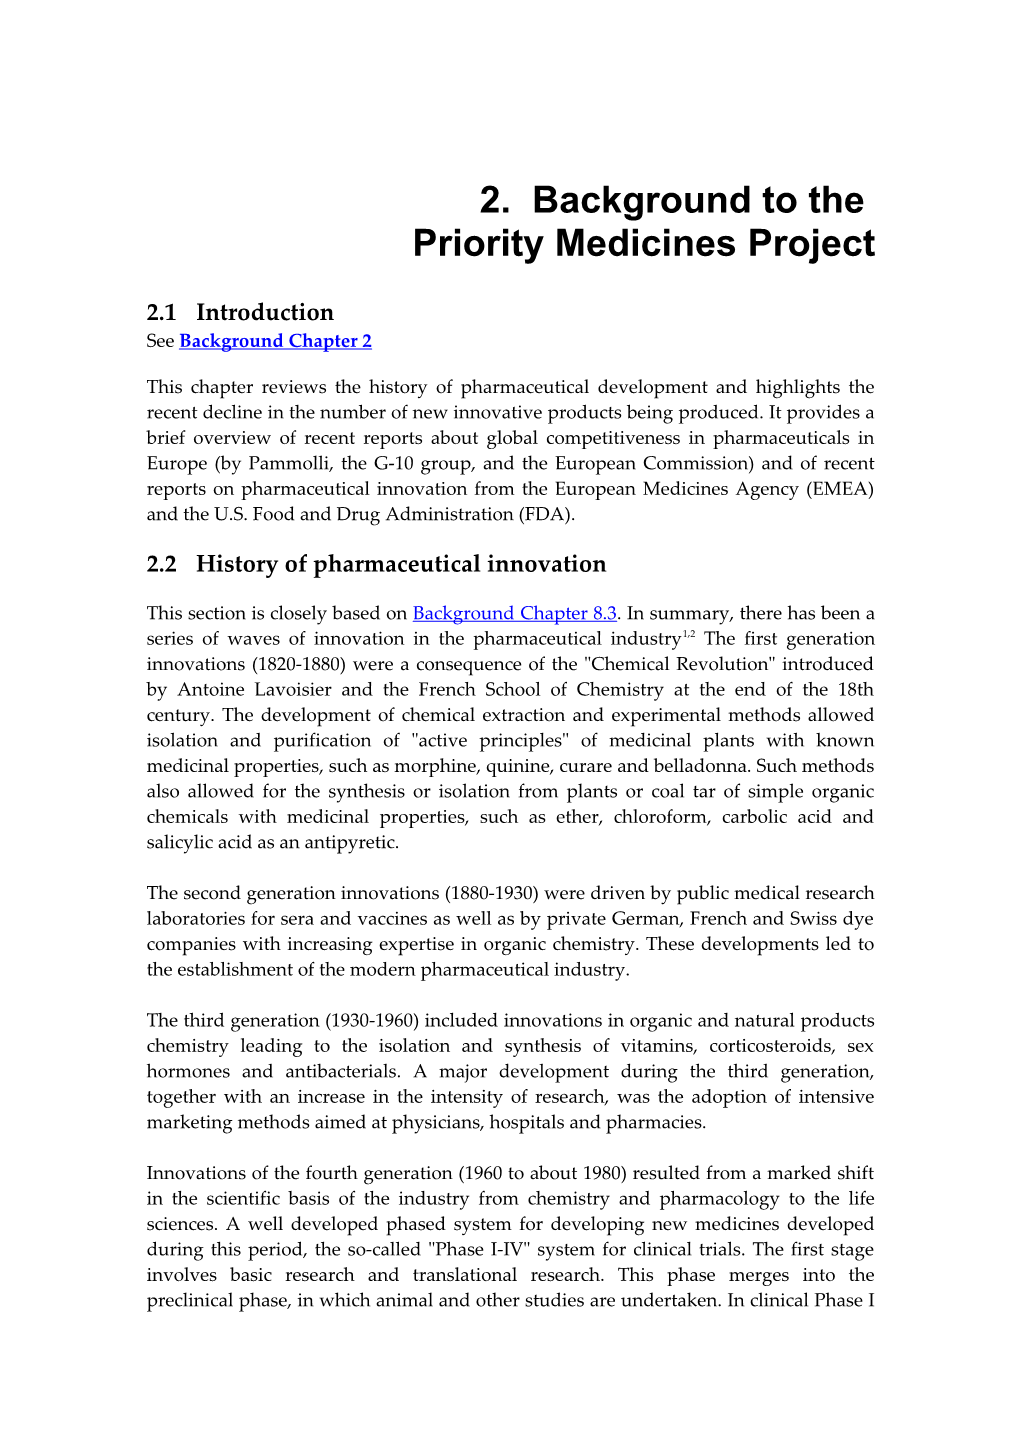 2. Background to the Priority Medicines Project